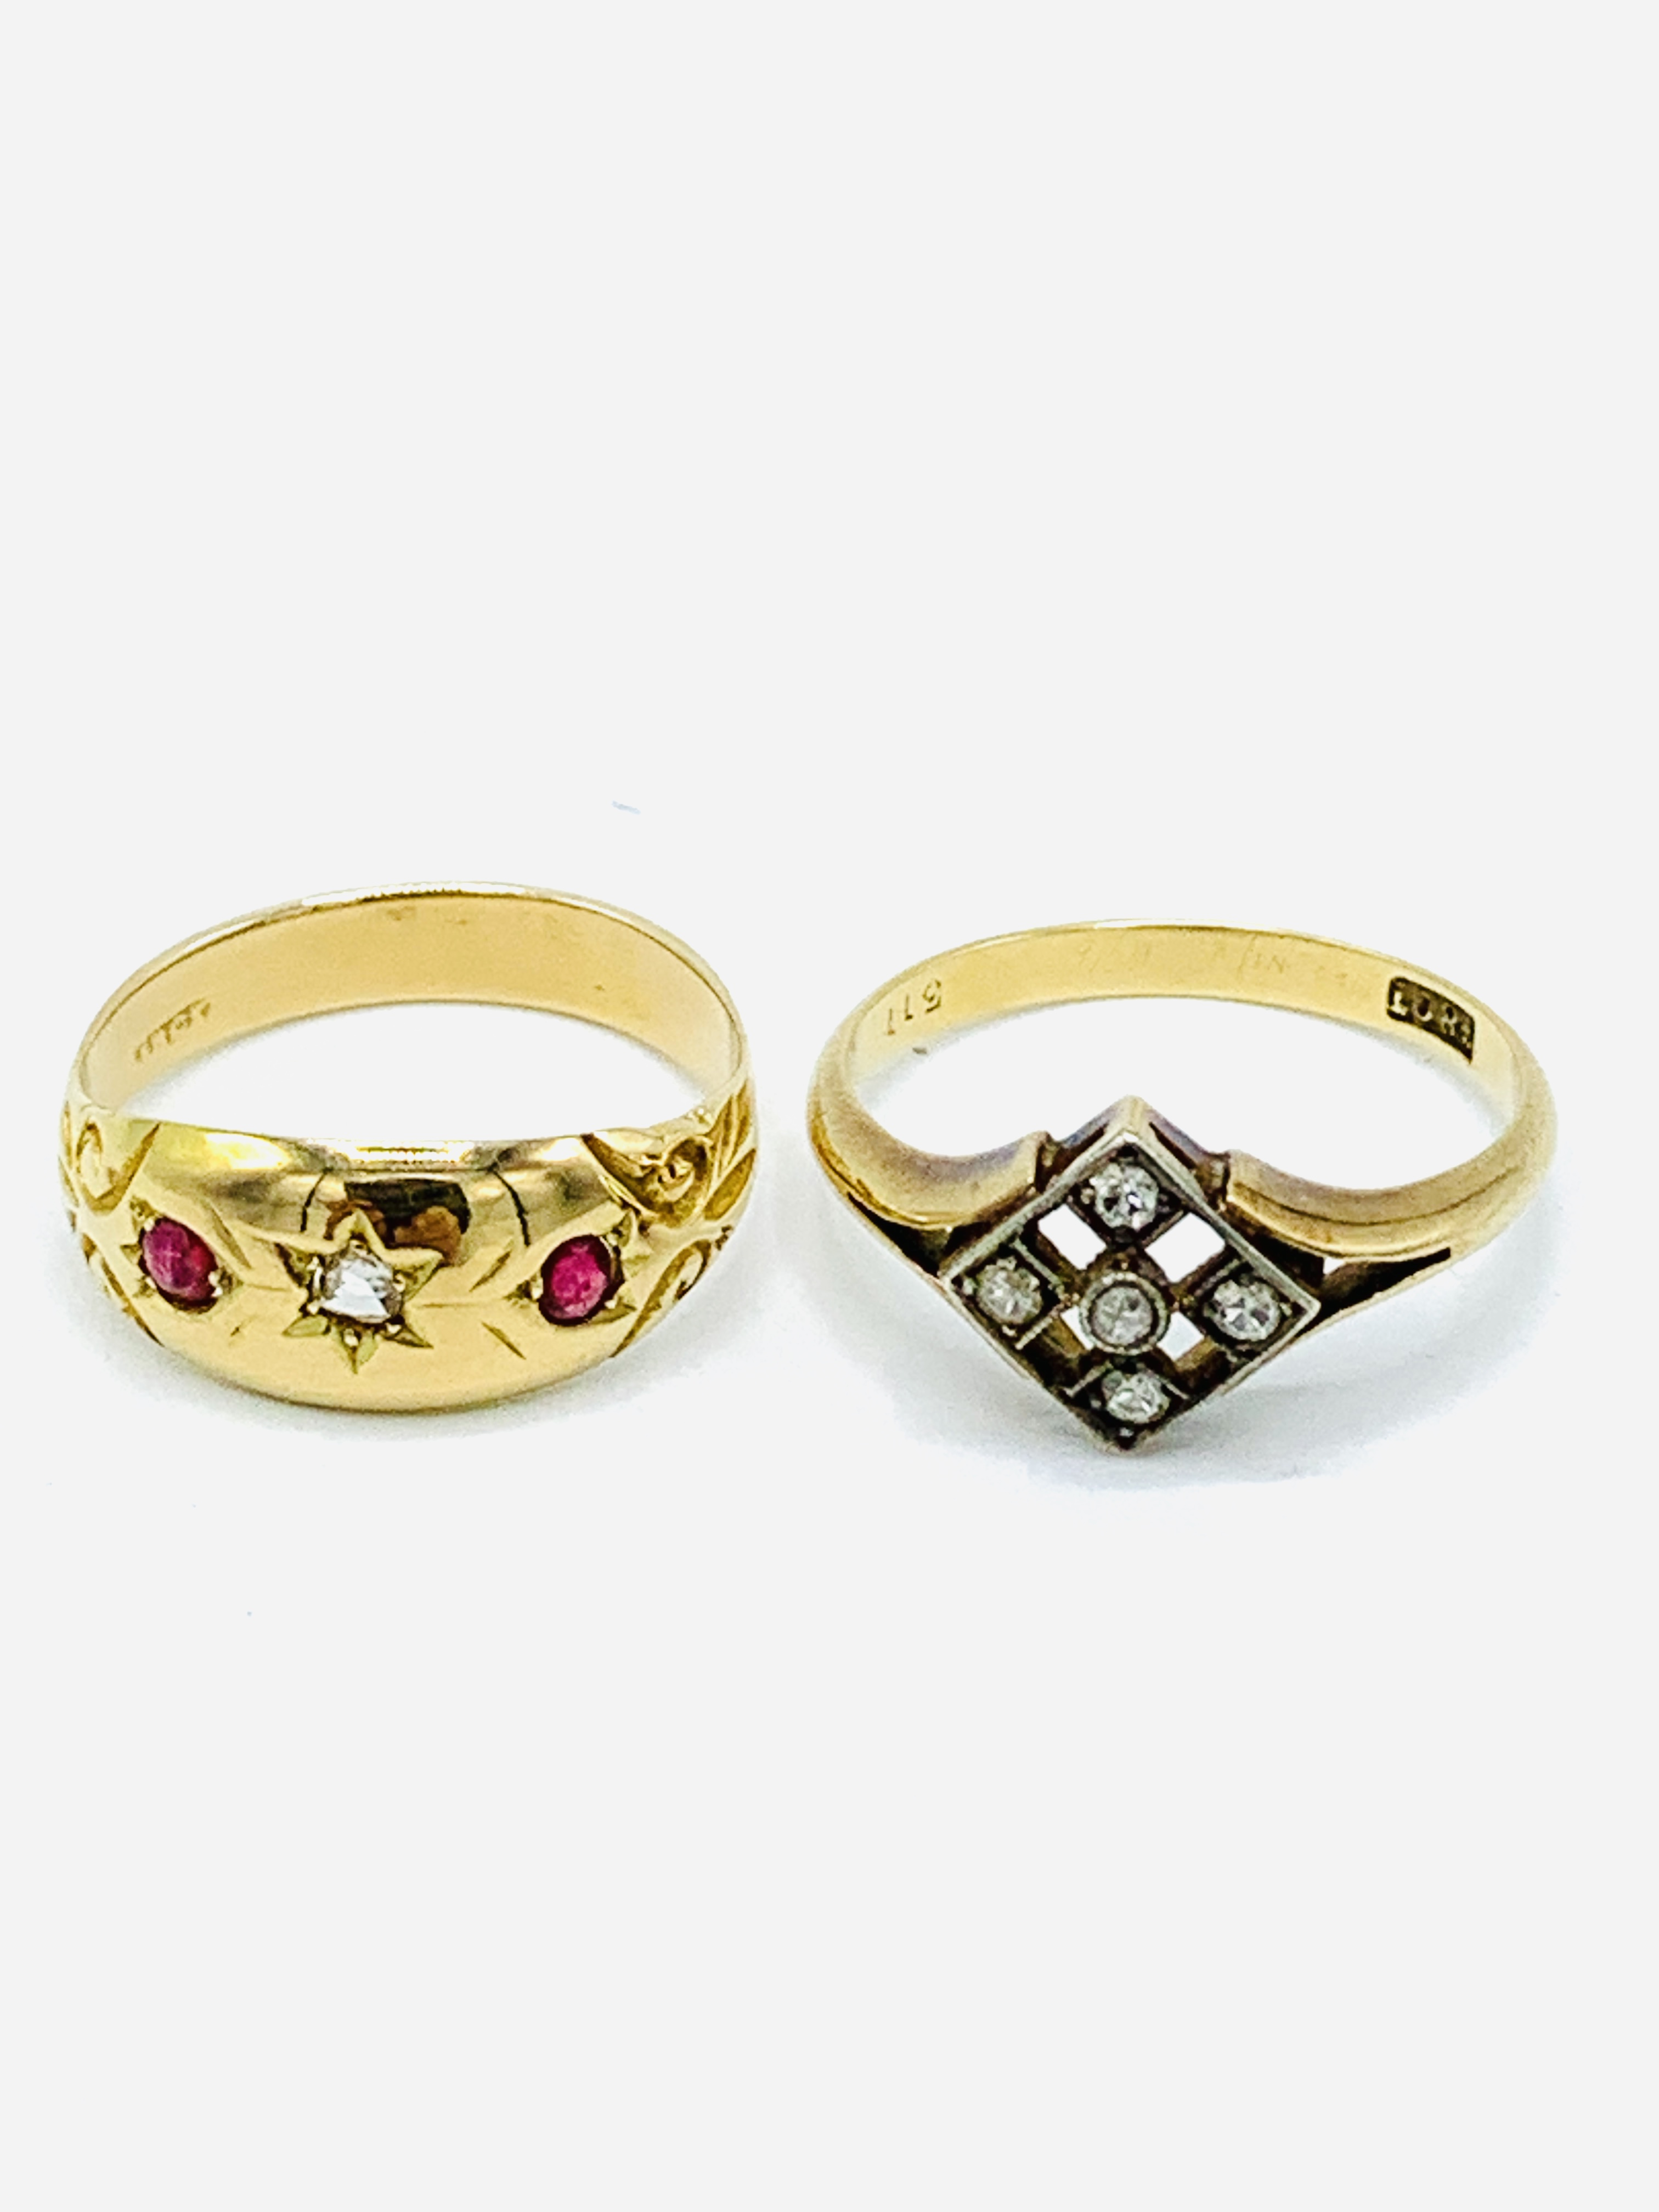 18ct gold ring set with 4 diamonds in a square, and an 18ct diamond and ruby set 'gypsy' ring - Image 2 of 5